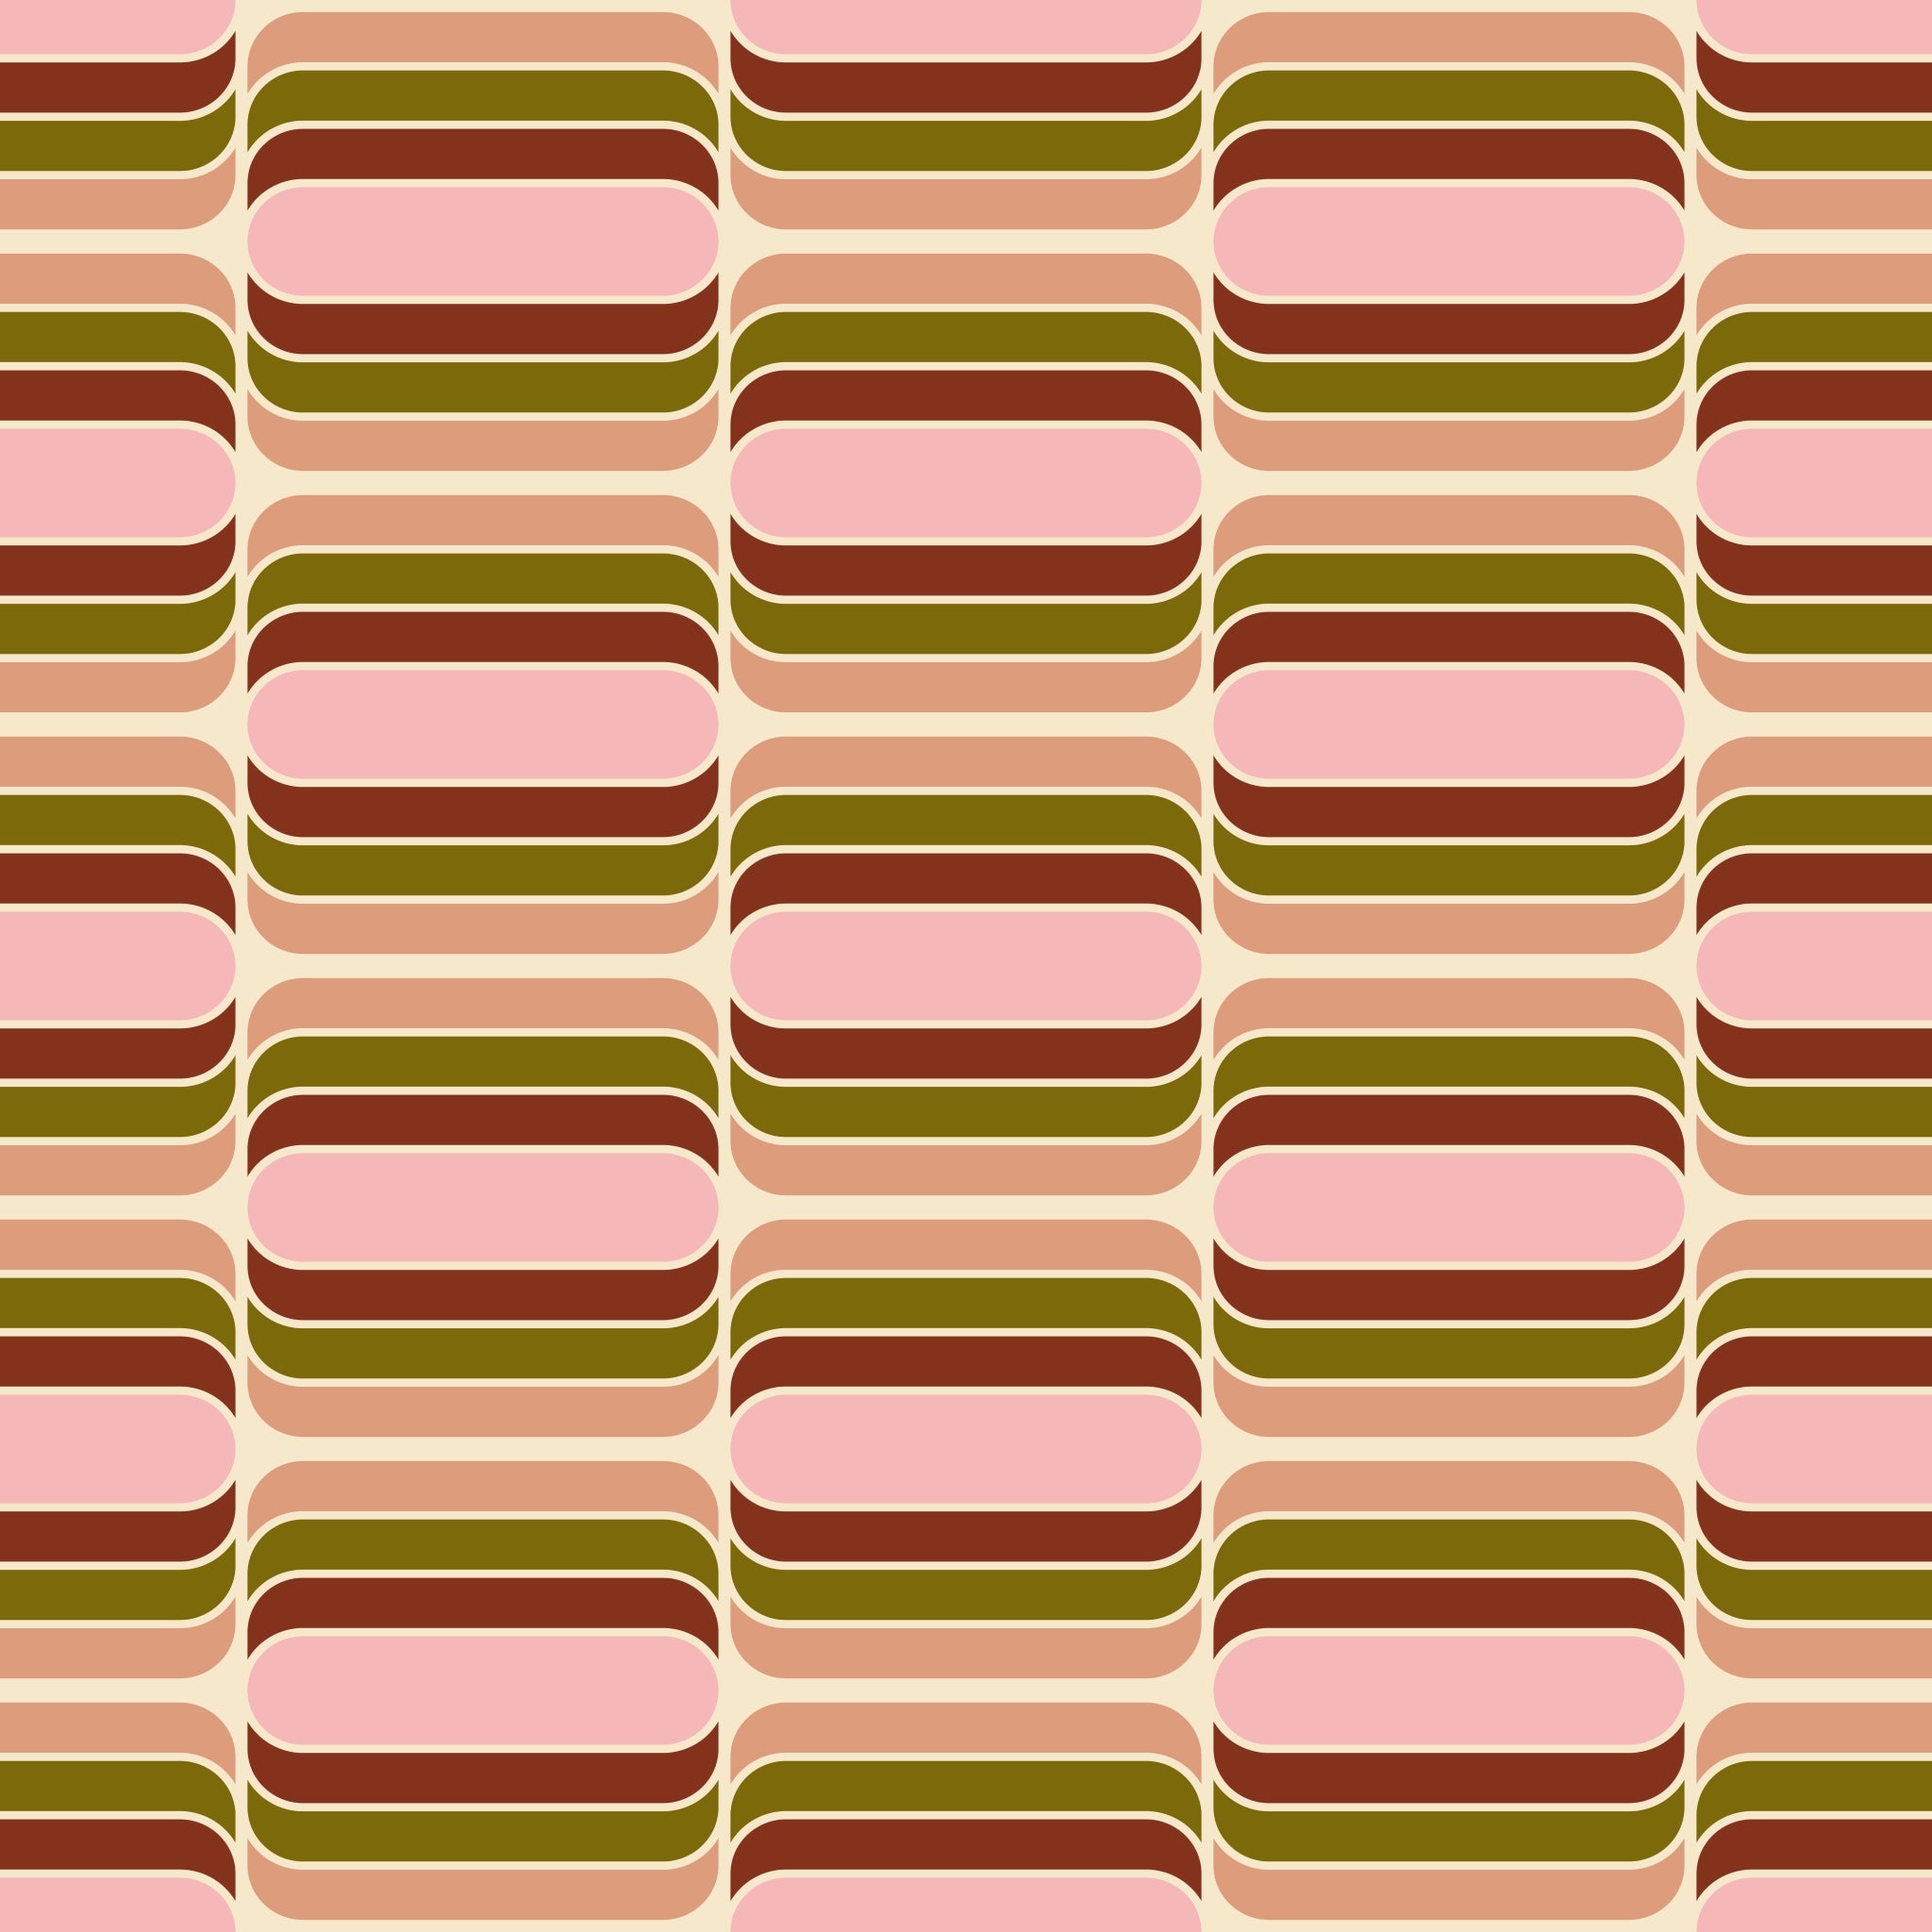 "Wall Blush's 30 and Flirty Wallpaper adds a playful touch to a modern room's decor."

(Note: The provided image only shows a wallpaper pattern. Since there's no actual room visible in the image, the alt text assumes the wallpaper is used in a modern room based on the style of the wallpaper. If there were a room in the image, the type of room should be included in the alt text according to the user's instructions.)